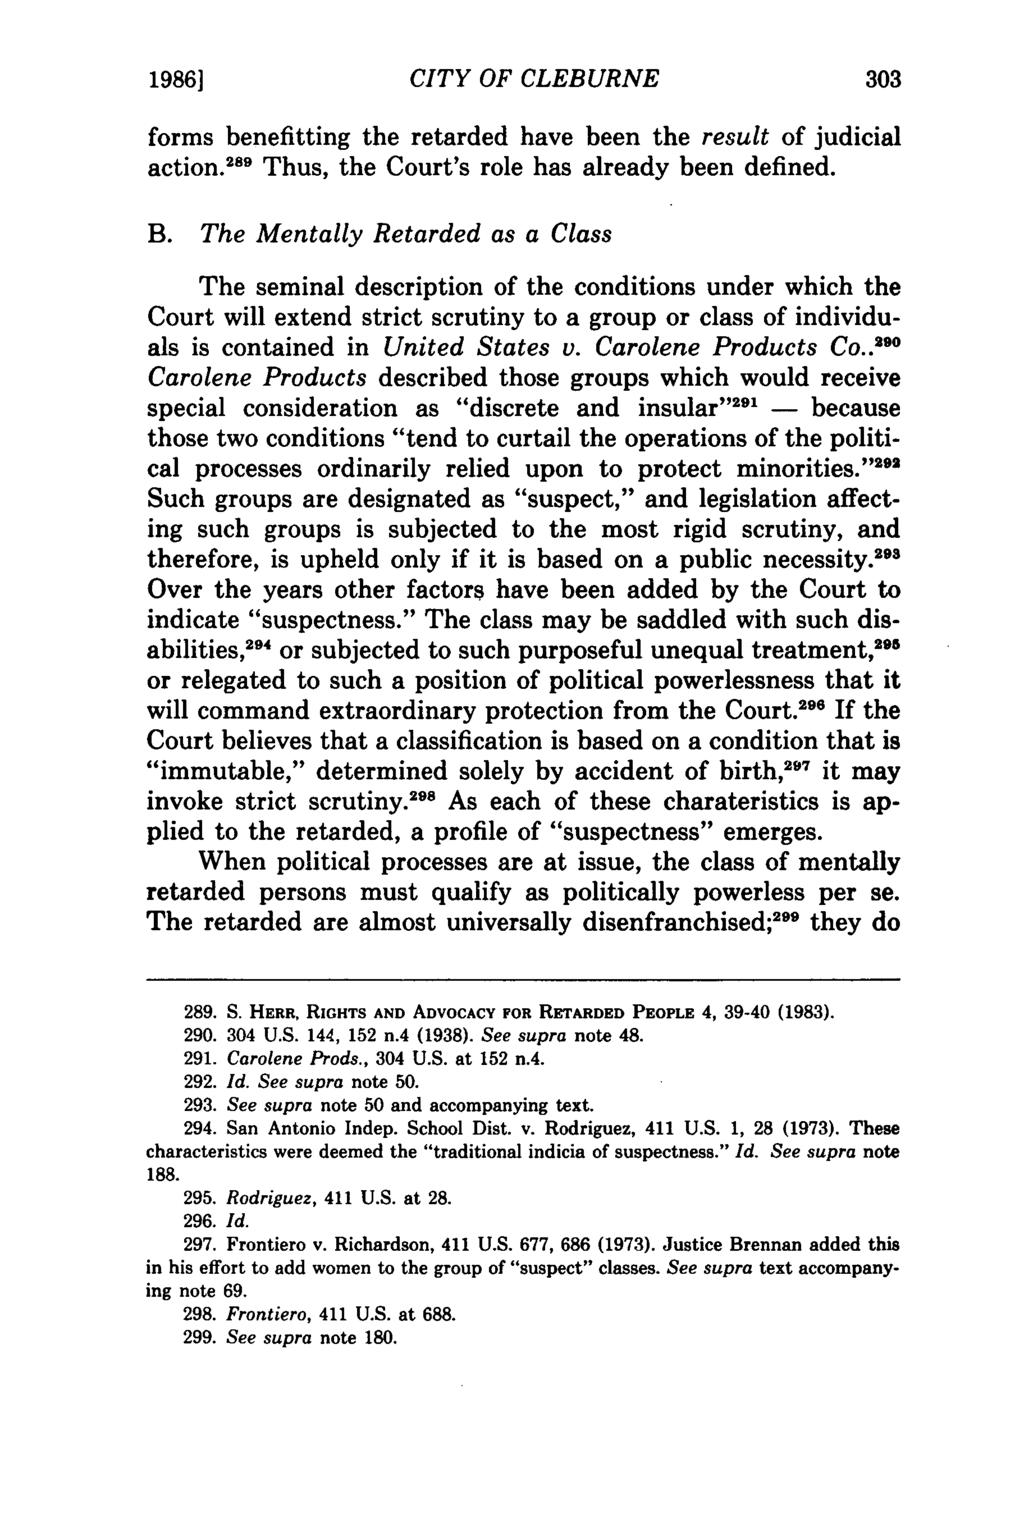 1986] CITY OF CLEBURNE forms benefitting the retarded have been the result of judicial action. 289 Thus, the Court's role has already been defined. B.